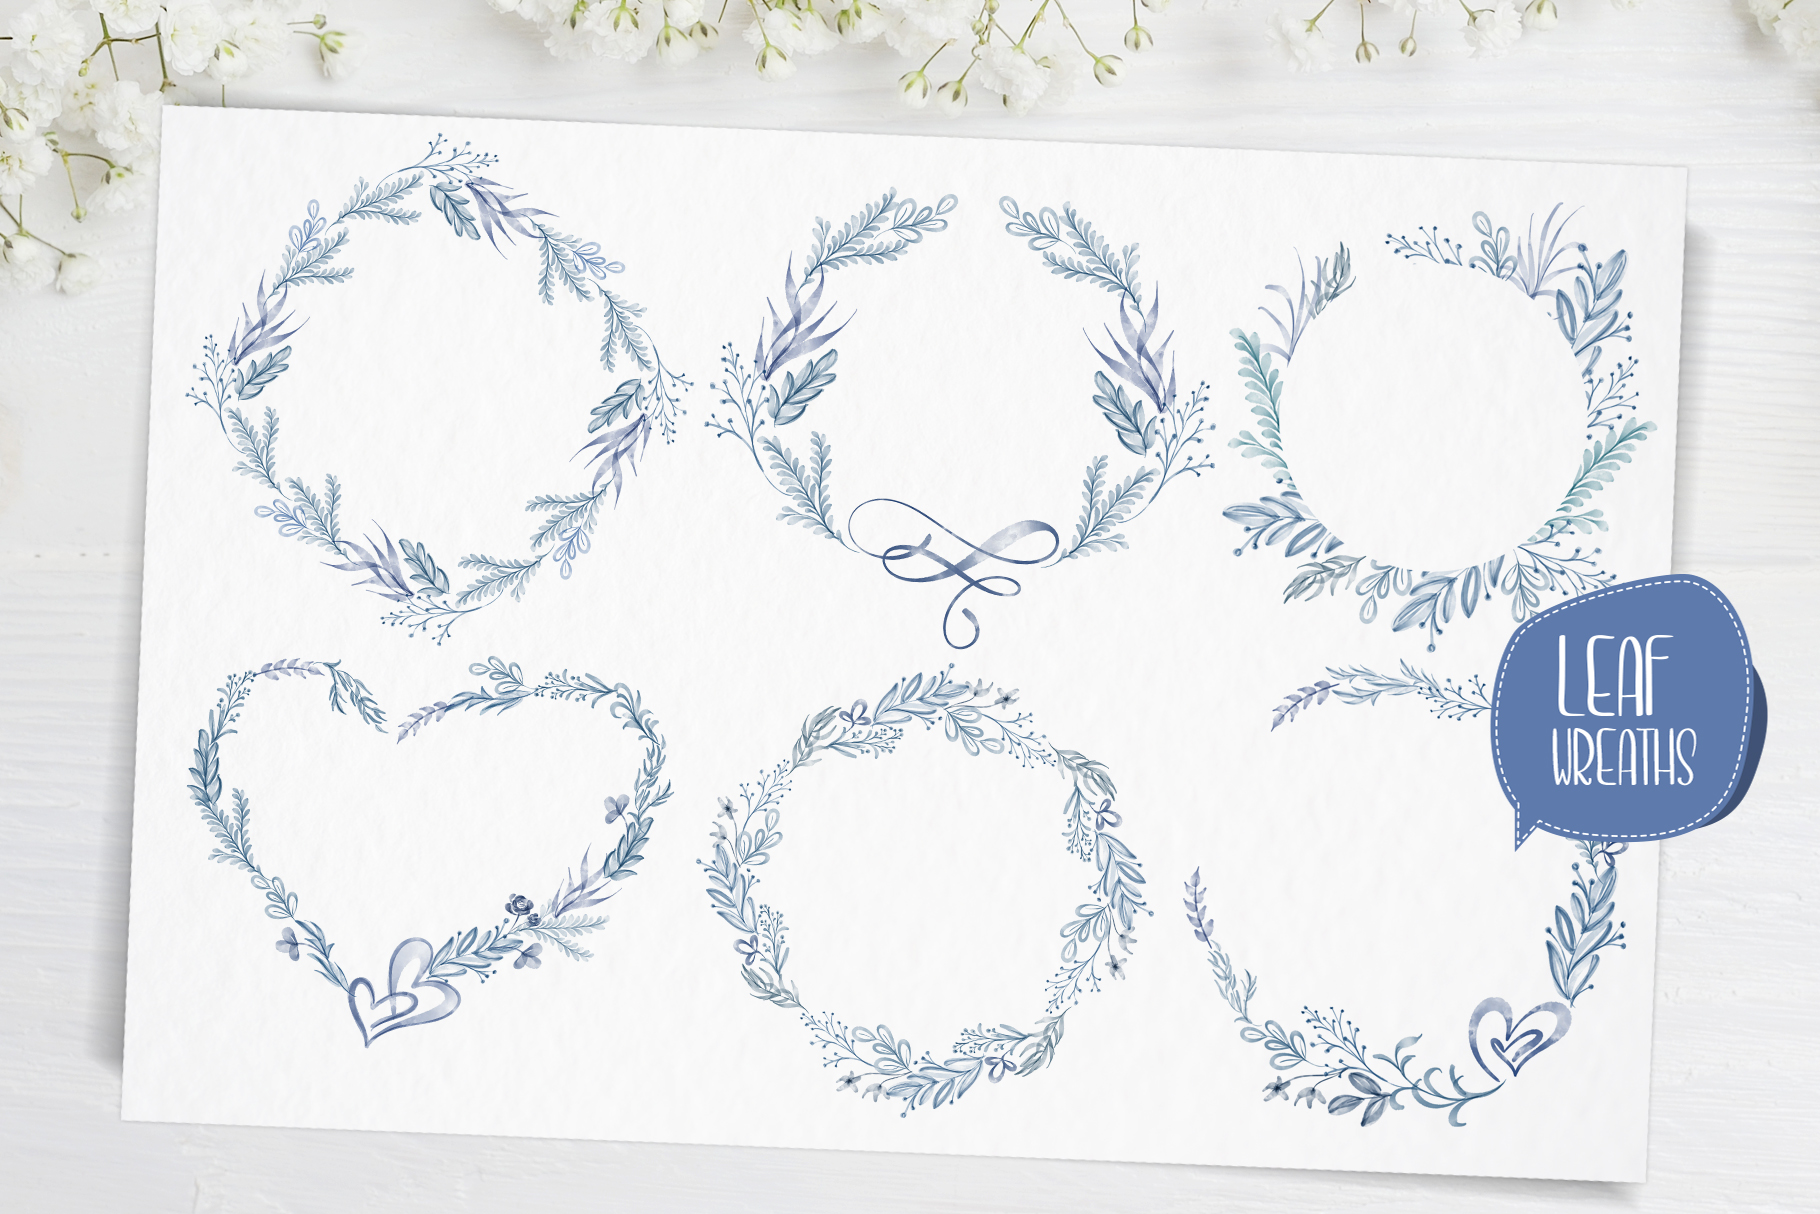 Watercolor blue leaf frames in different shapes.